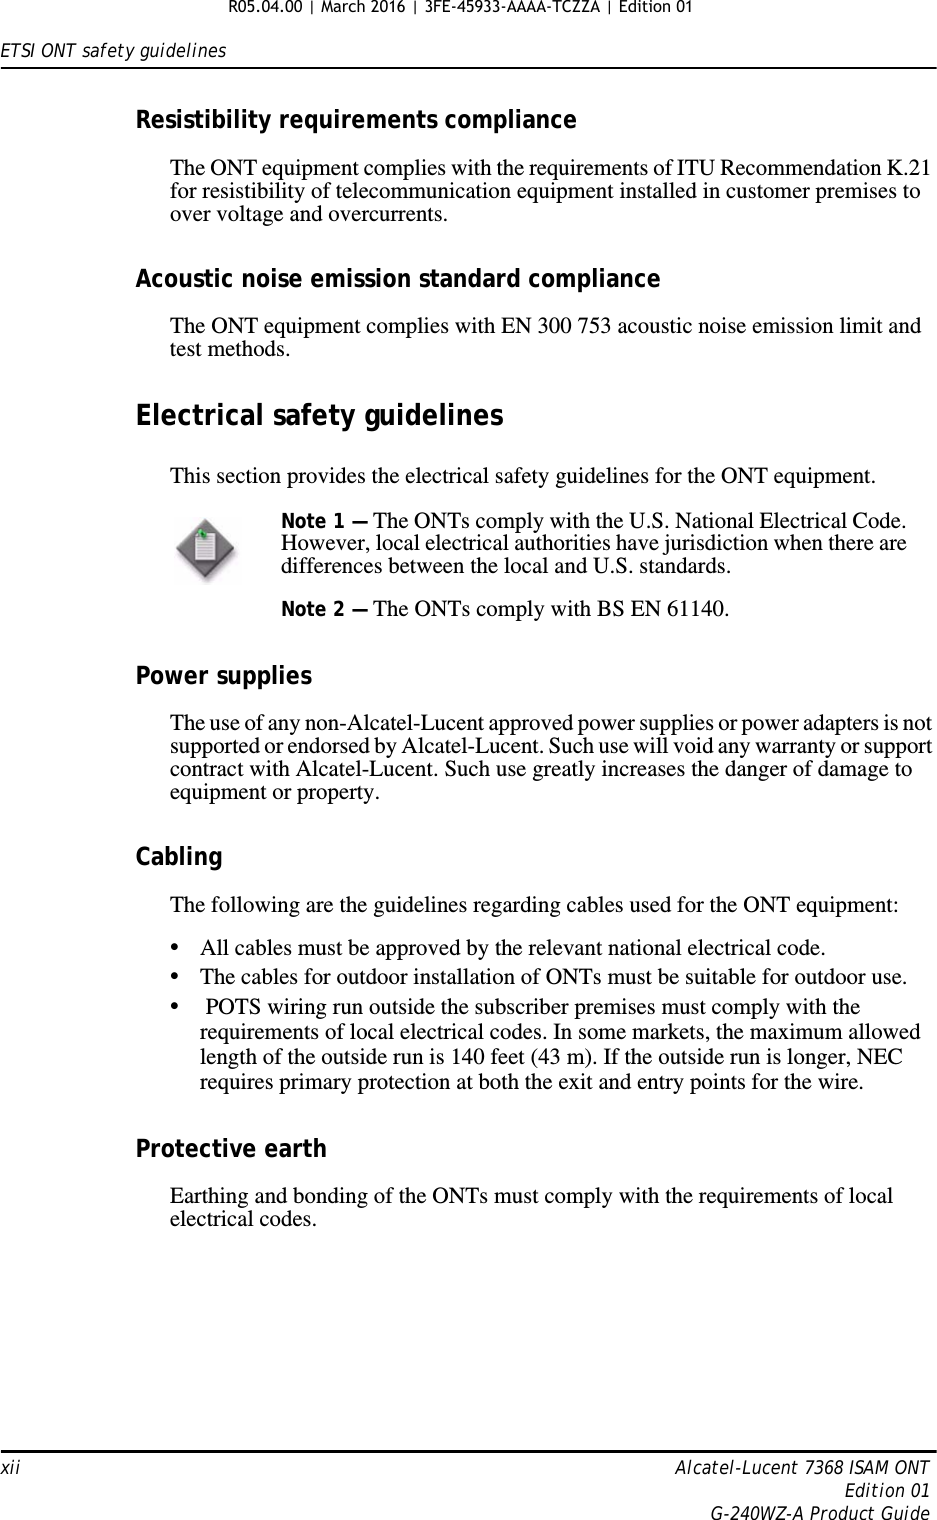 ETSI ONT safety guidelinesxii Alcatel-Lucent 7368 ISAM ONTEdition 01G-240WZ-A Product GuideResistibility requirements complianceThe ONT equipment complies with the requirements of ITU Recommendation K.21 for resistibility of telecommunication equipment installed in customer premises to over voltage and overcurrents.Acoustic noise emission standard complianceThe ONT equipment complies with EN 300 753 acoustic noise emission limit and test methods. Electrical safety guidelinesThis section provides the electrical safety guidelines for the ONT equipment.Power suppliesThe use of any non-Alcatel-Lucent approved power supplies or power adapters is not supported or endorsed by Alcatel-Lucent. Such use will void any warranty or support contract with Alcatel-Lucent. Such use greatly increases the danger of damage to equipment or property.CablingThe following are the guidelines regarding cables used for the ONT equipment:•All cables must be approved by the relevant national electrical code.•The cables for outdoor installation of ONTs must be suitable for outdoor use.• POTS wiring run outside the subscriber premises must comply with the requirements of local electrical codes. In some markets, the maximum allowed length of the outside run is 140 feet (43 m). If the outside run is longer, NEC requires primary protection at both the exit and entry points for the wire.Protective earthEarthing and bonding of the ONTs must comply with the requirements of local electrical codes.Note 1 — The ONTs comply with the U.S. National Electrical Code. However, local electrical authorities have jurisdiction when there are differences between the local and U.S. standards.Note 2 — The ONTs comply with BS EN 61140.R05.04.00 | March 2016 | 3FE-45933-AAAA-TCZZA | Edition 01 